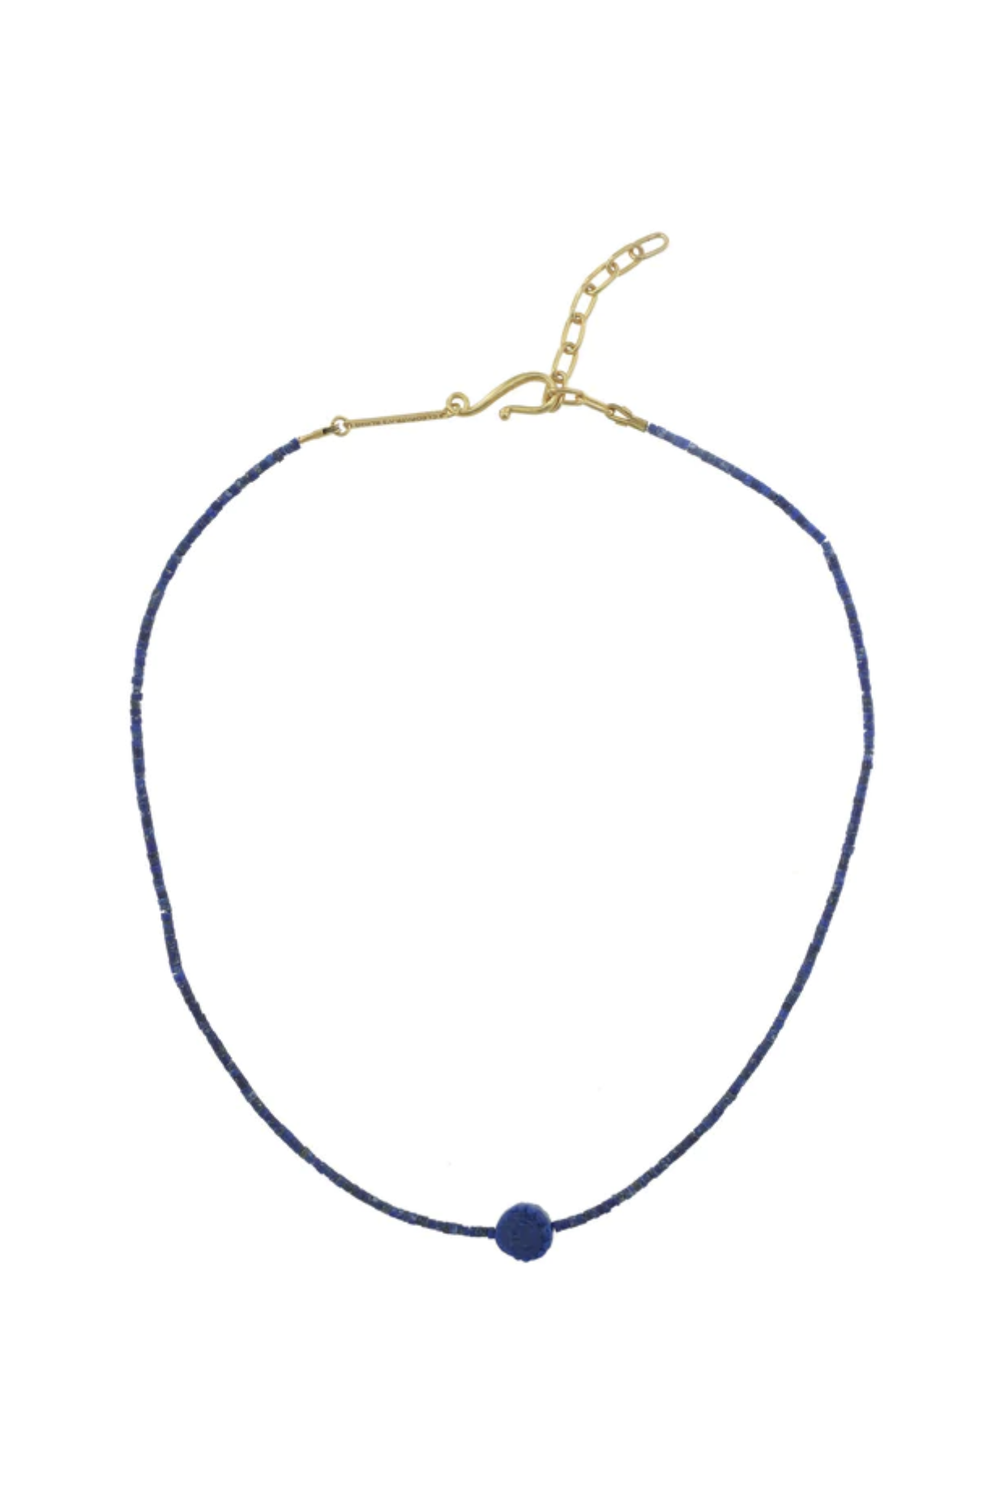 Minuit Necklace in Lapis Lazuli 18k Gold Plated